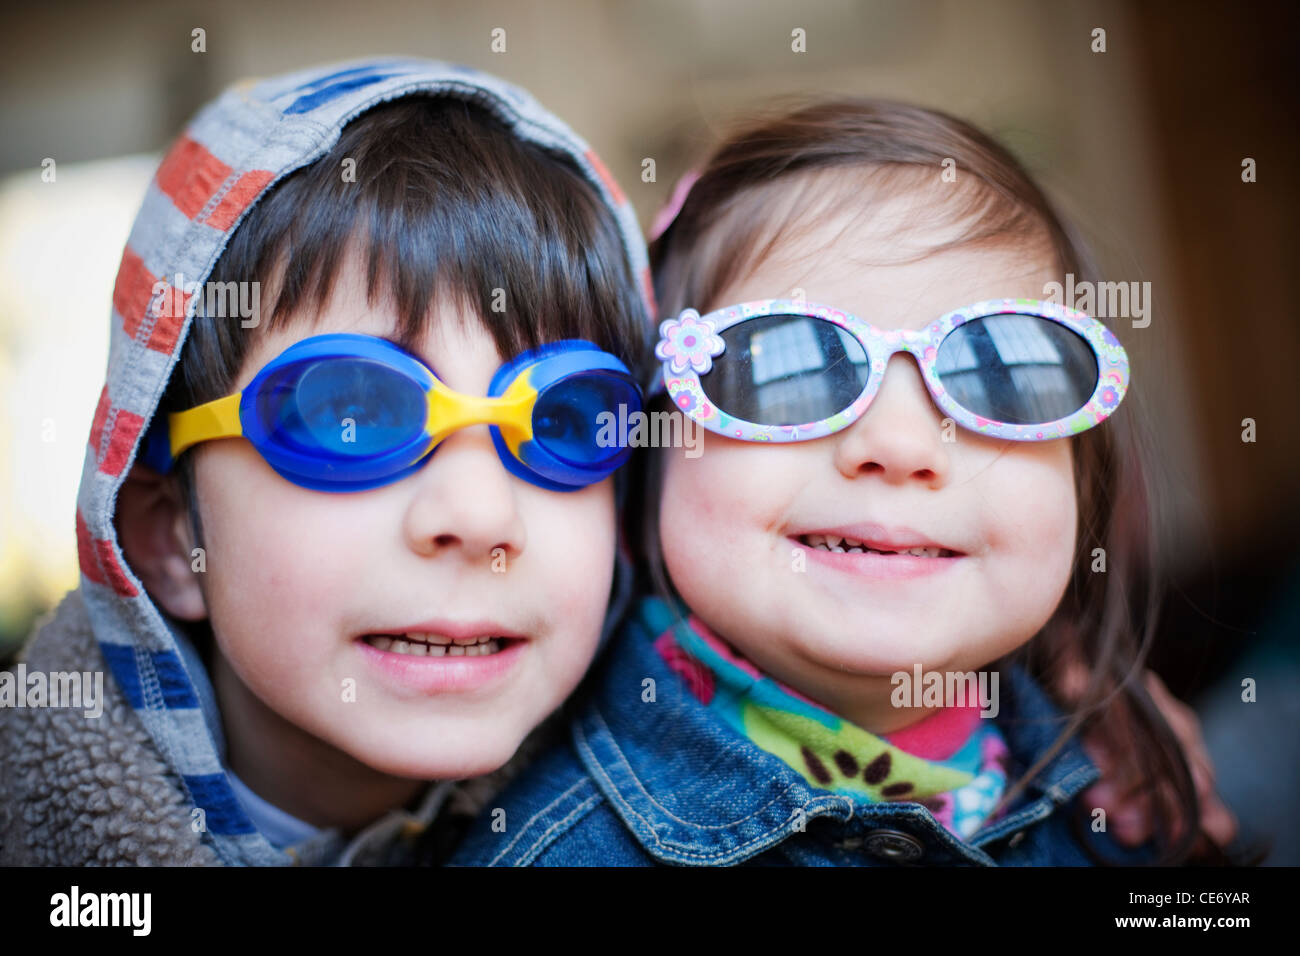 Two children wearing swimming goggles and sunglasses Stock Photo